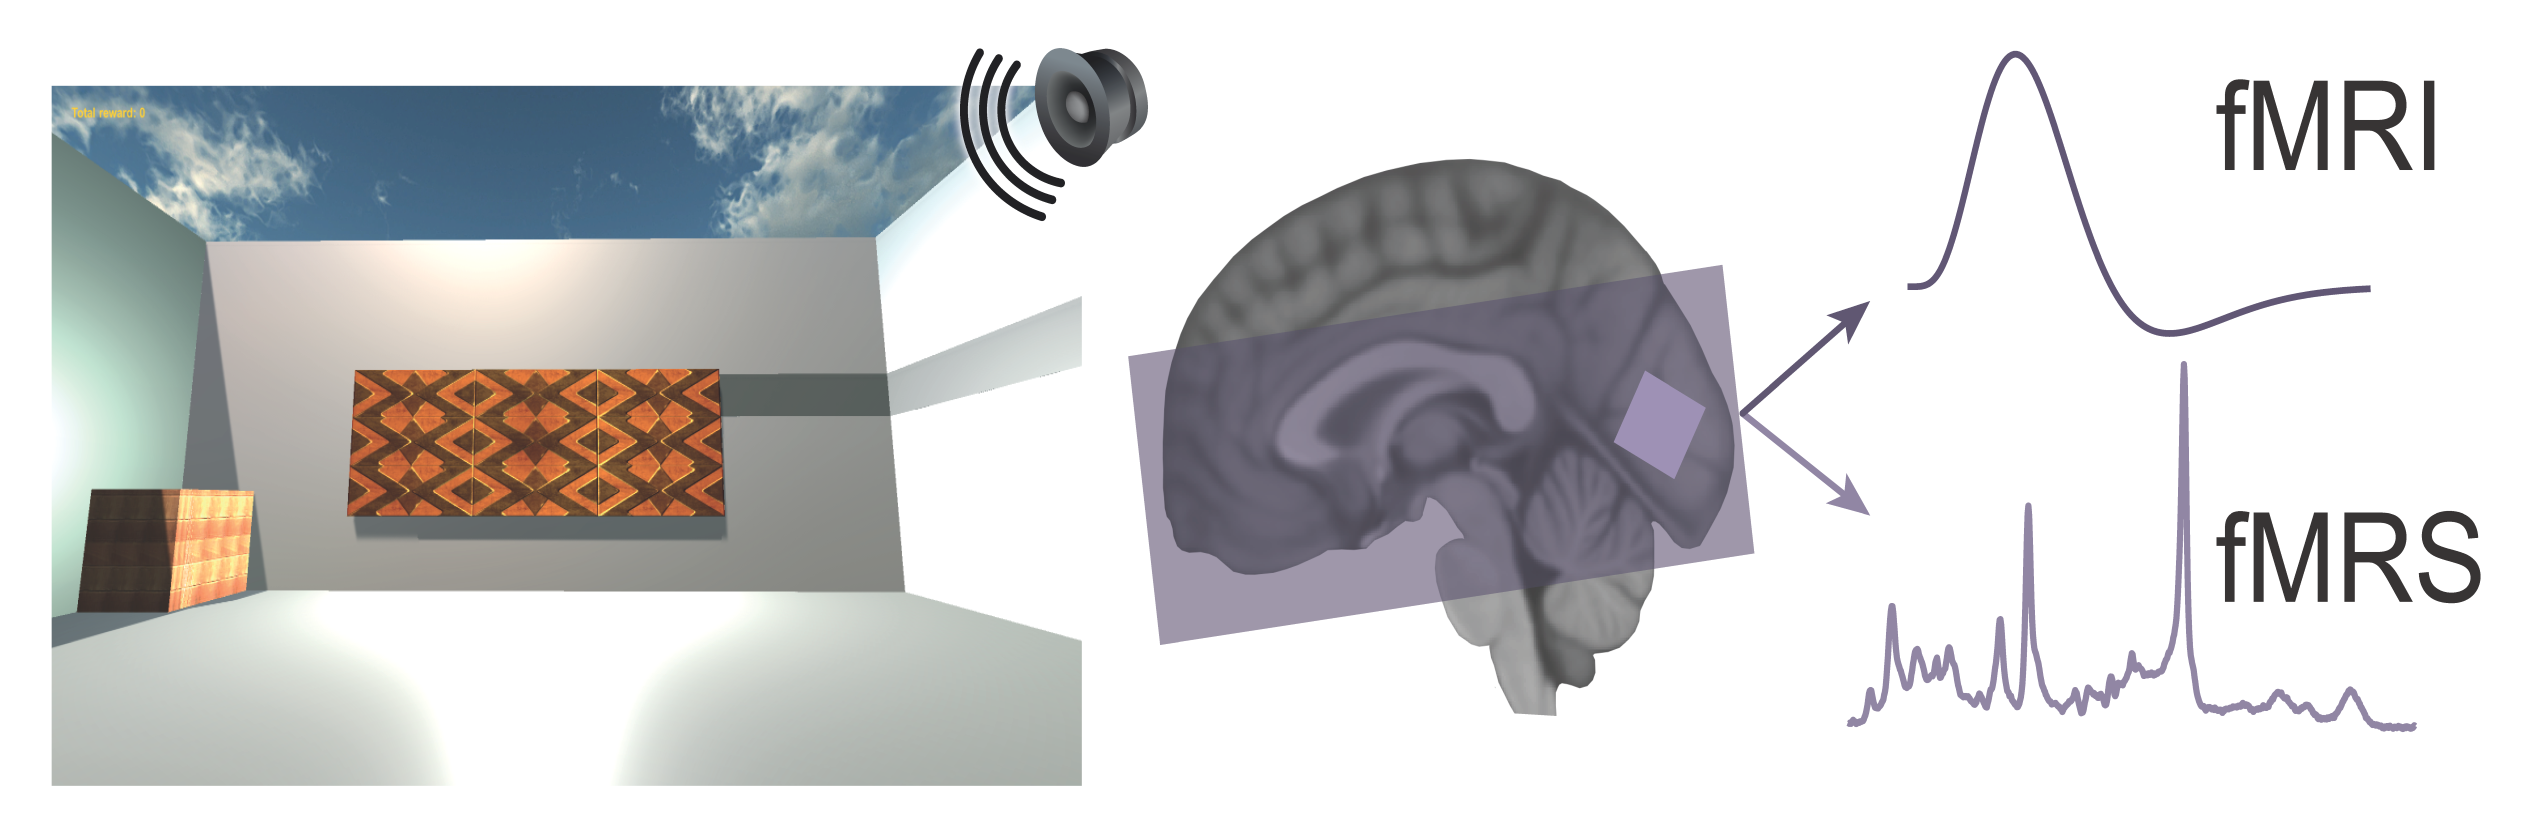 image of virtual environment, and images of fMRI and fMRI ouputs being read from brain imaging